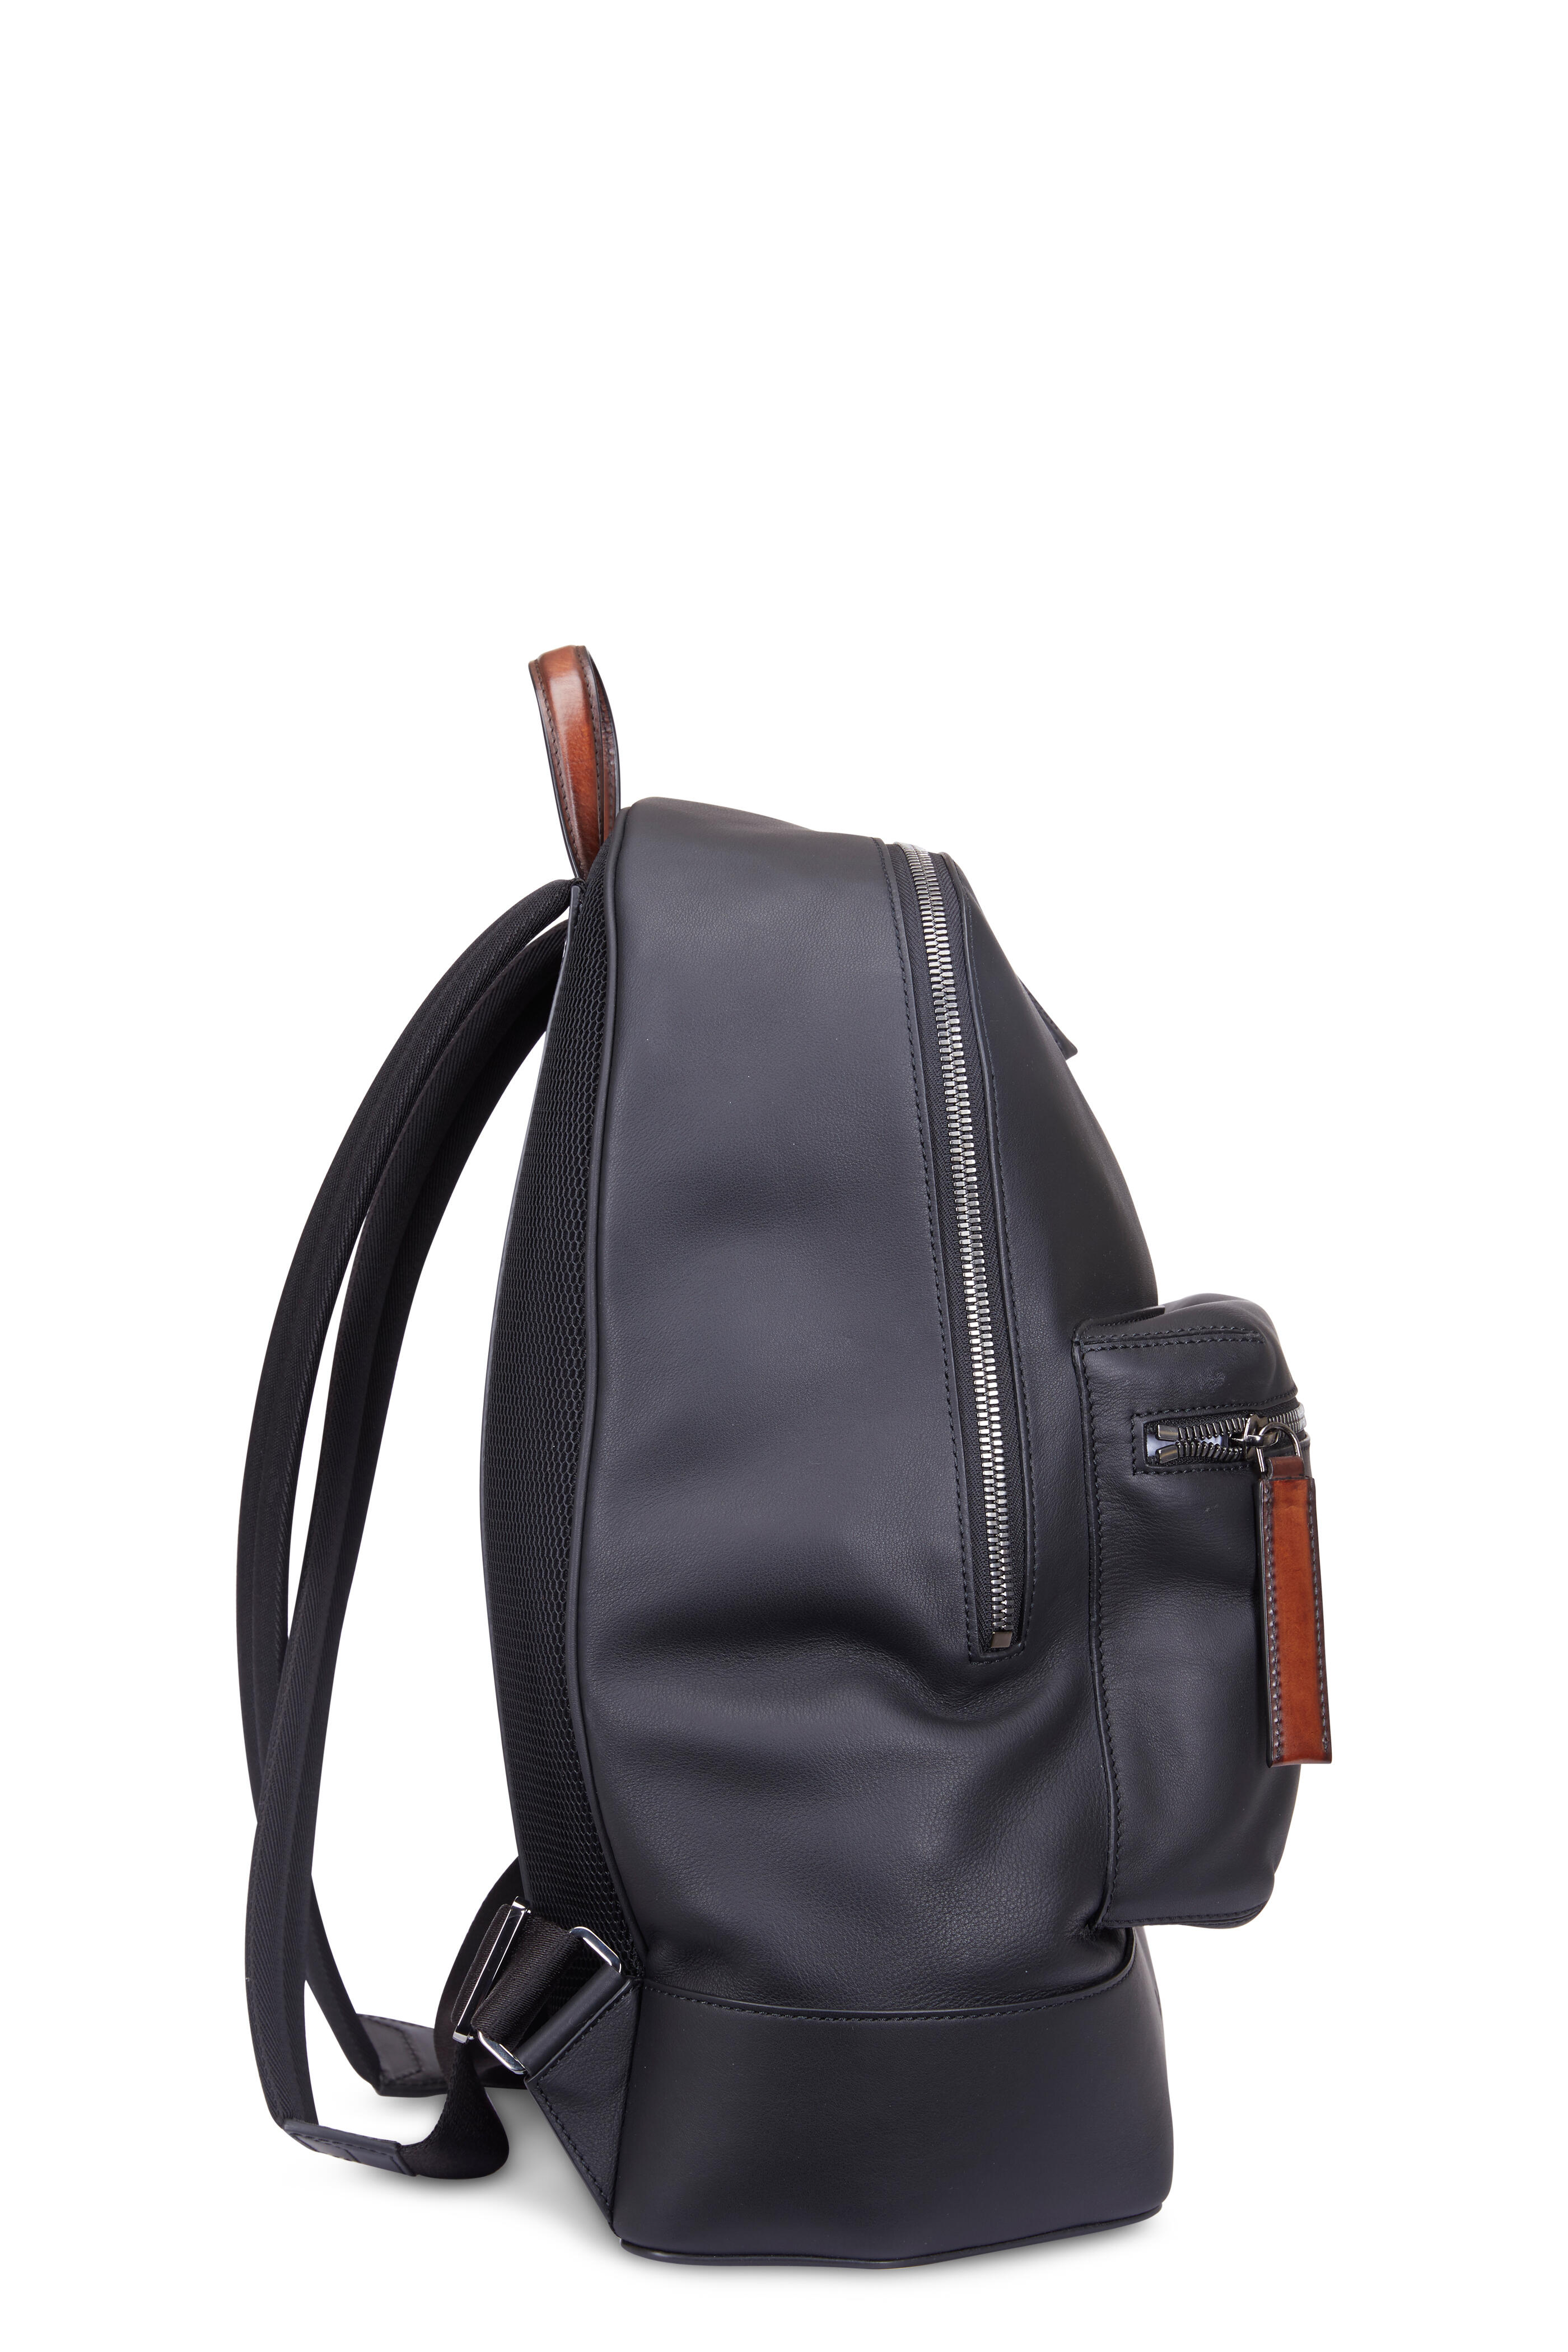 Berluti - Volume Black Leather Backpack | Mitchell Stores